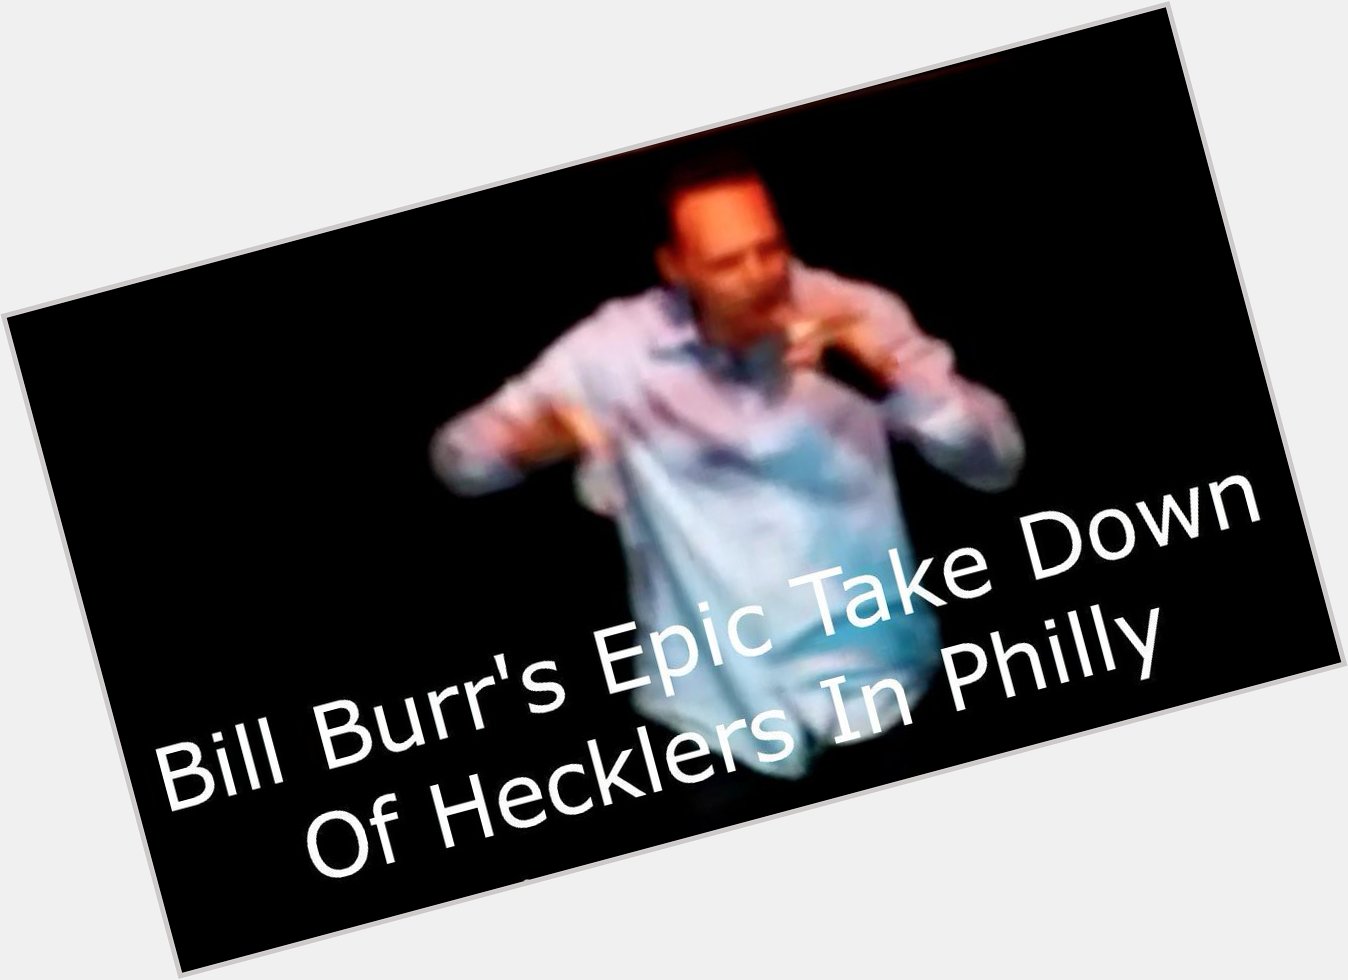 Happy birthday to Bill Burr!! Enjoy his master class on how to destroy hecklers! 